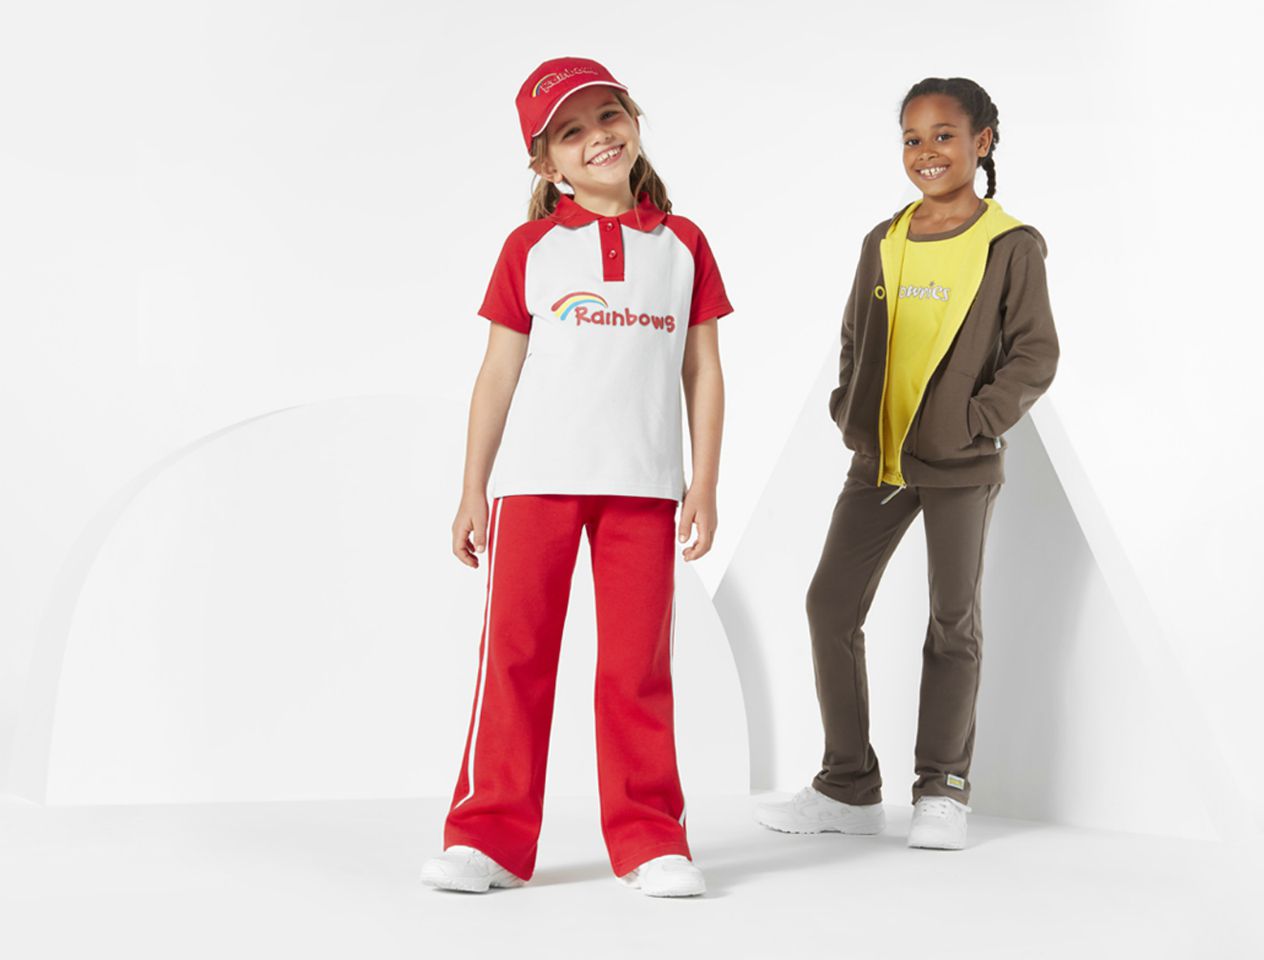 Girls wearing girl guiding outfits available at John Lewis & Partners